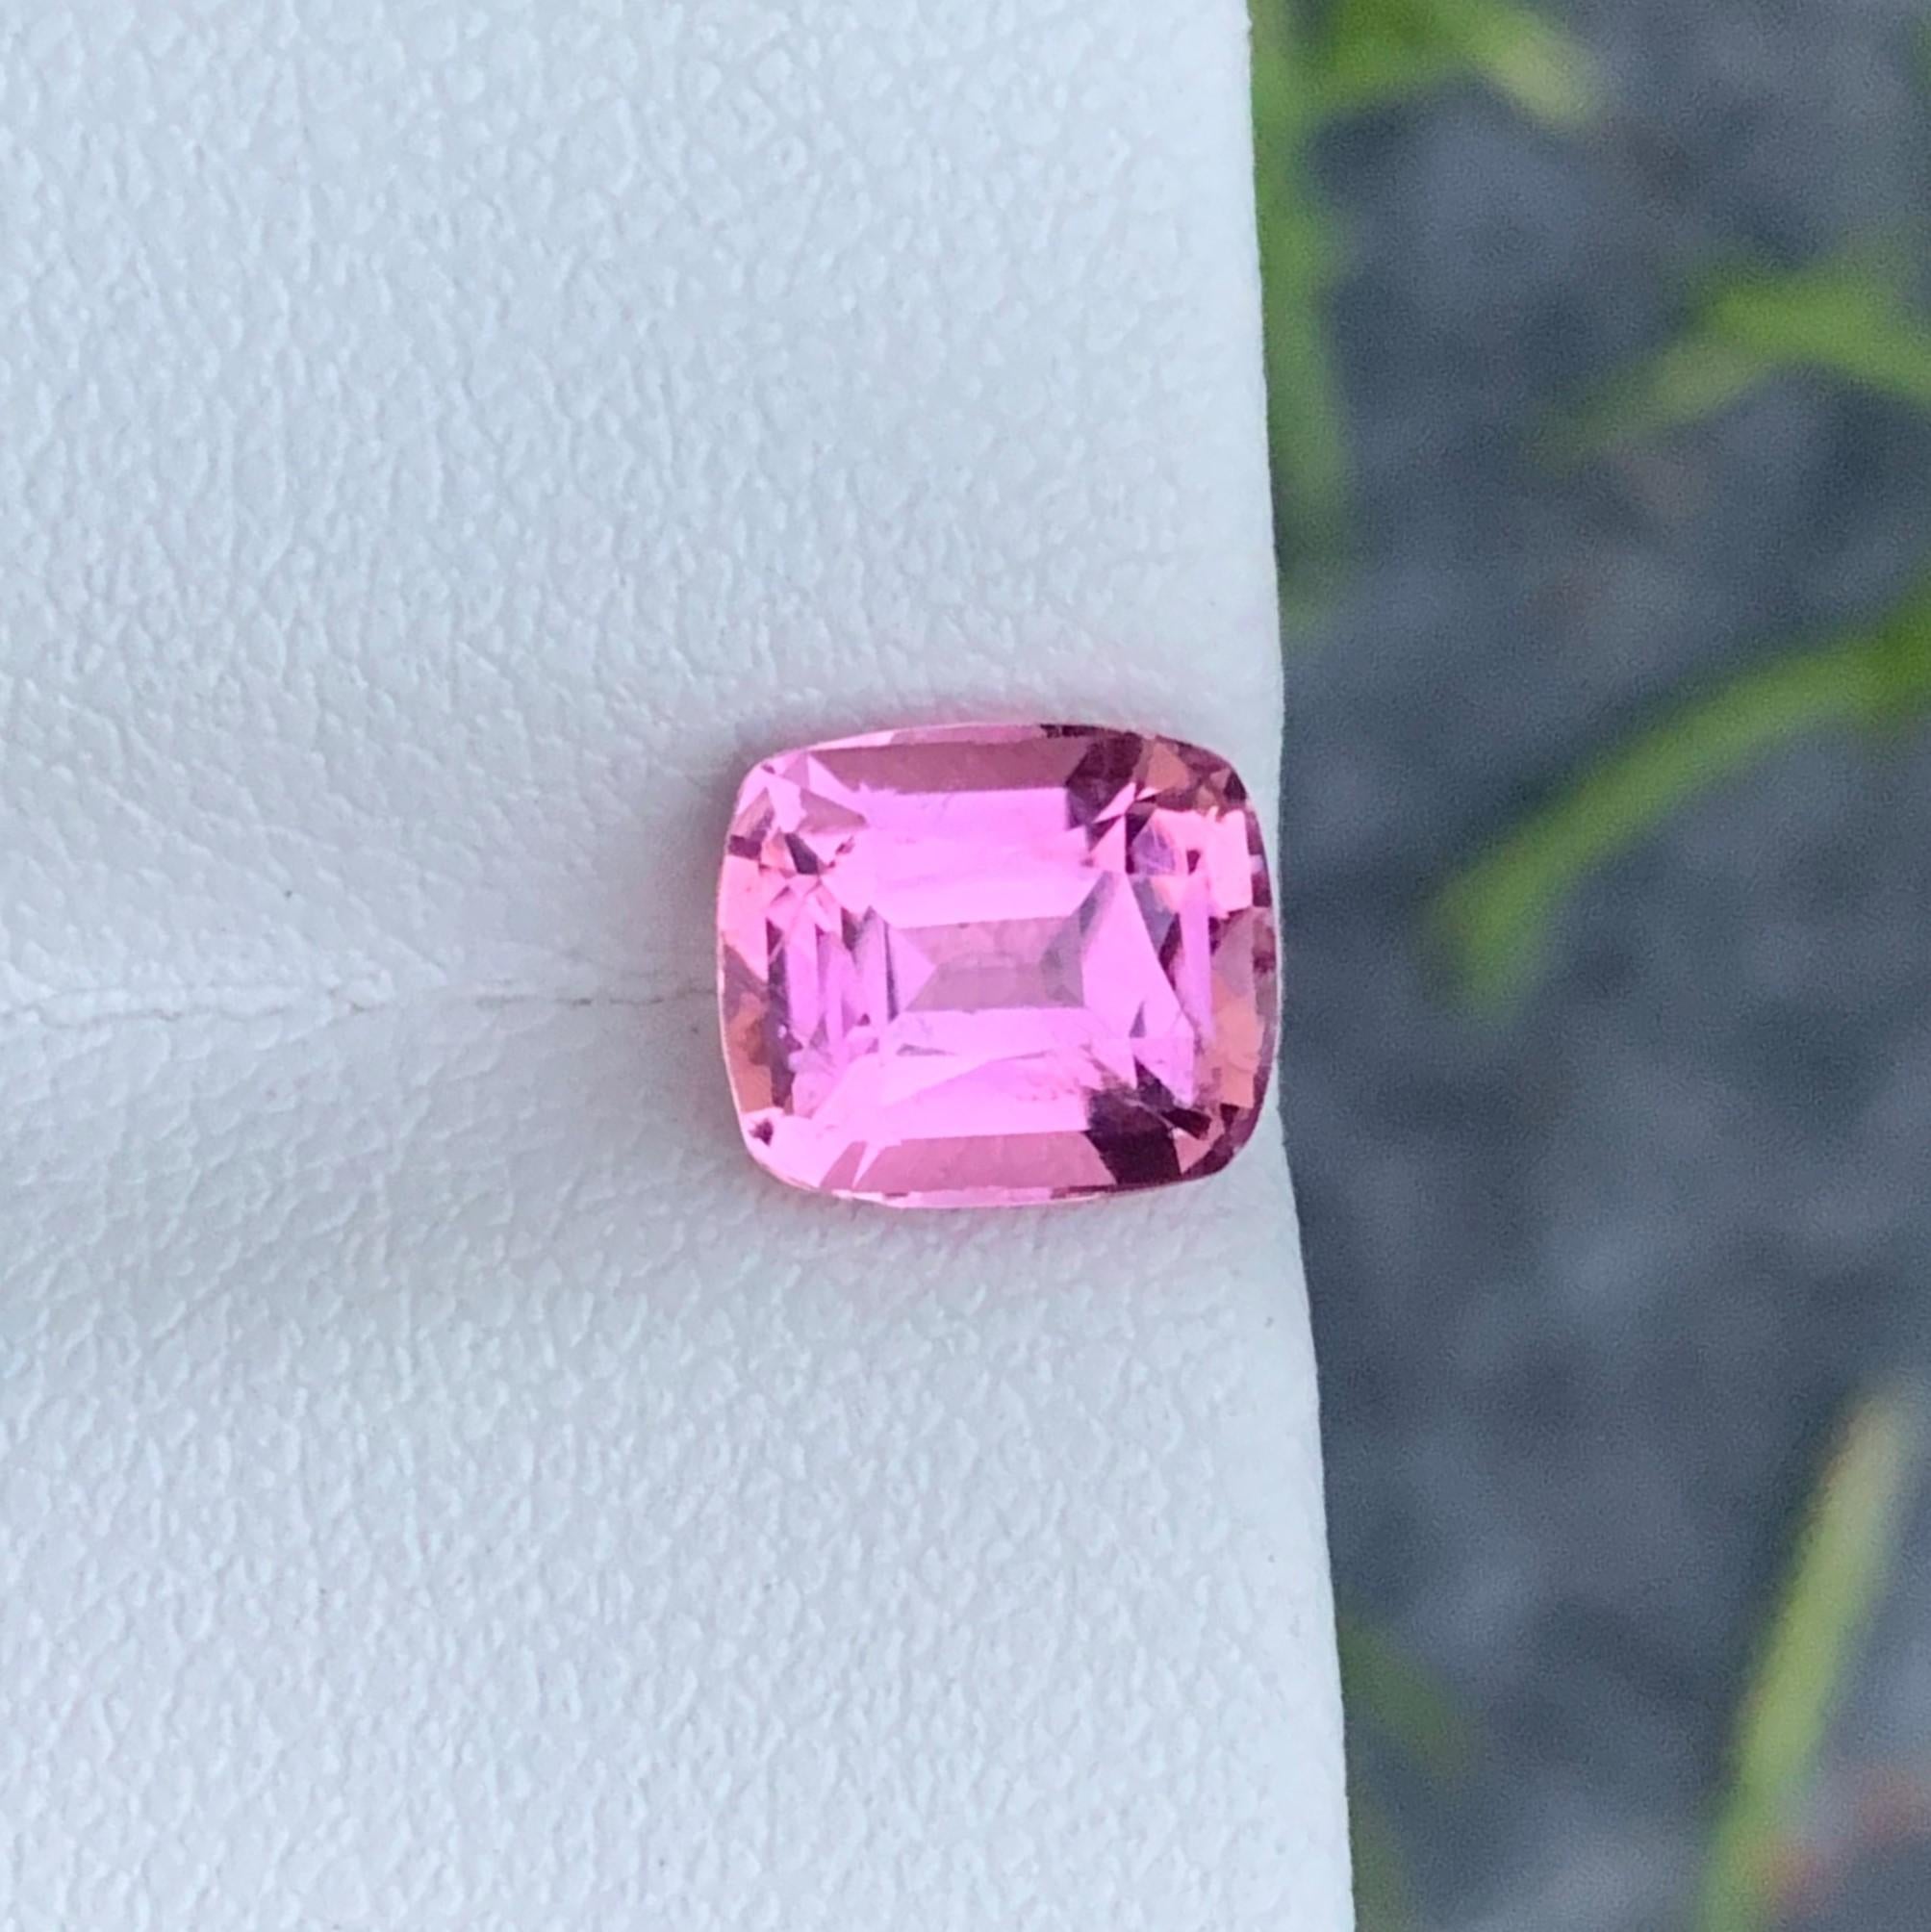 Faceted Tourmaline
Weight: 2.55 Carats
Dimension: 8.3x7.2x5.6 Mm
Origin: Kunar Afghanistan
Color: Pink
Shape: Cushion
Clarity: Eye Clean
Certificate: On Demand

With a rating between 7 and 7.5 on the Mohs scale of mineral hardness, tourmaline